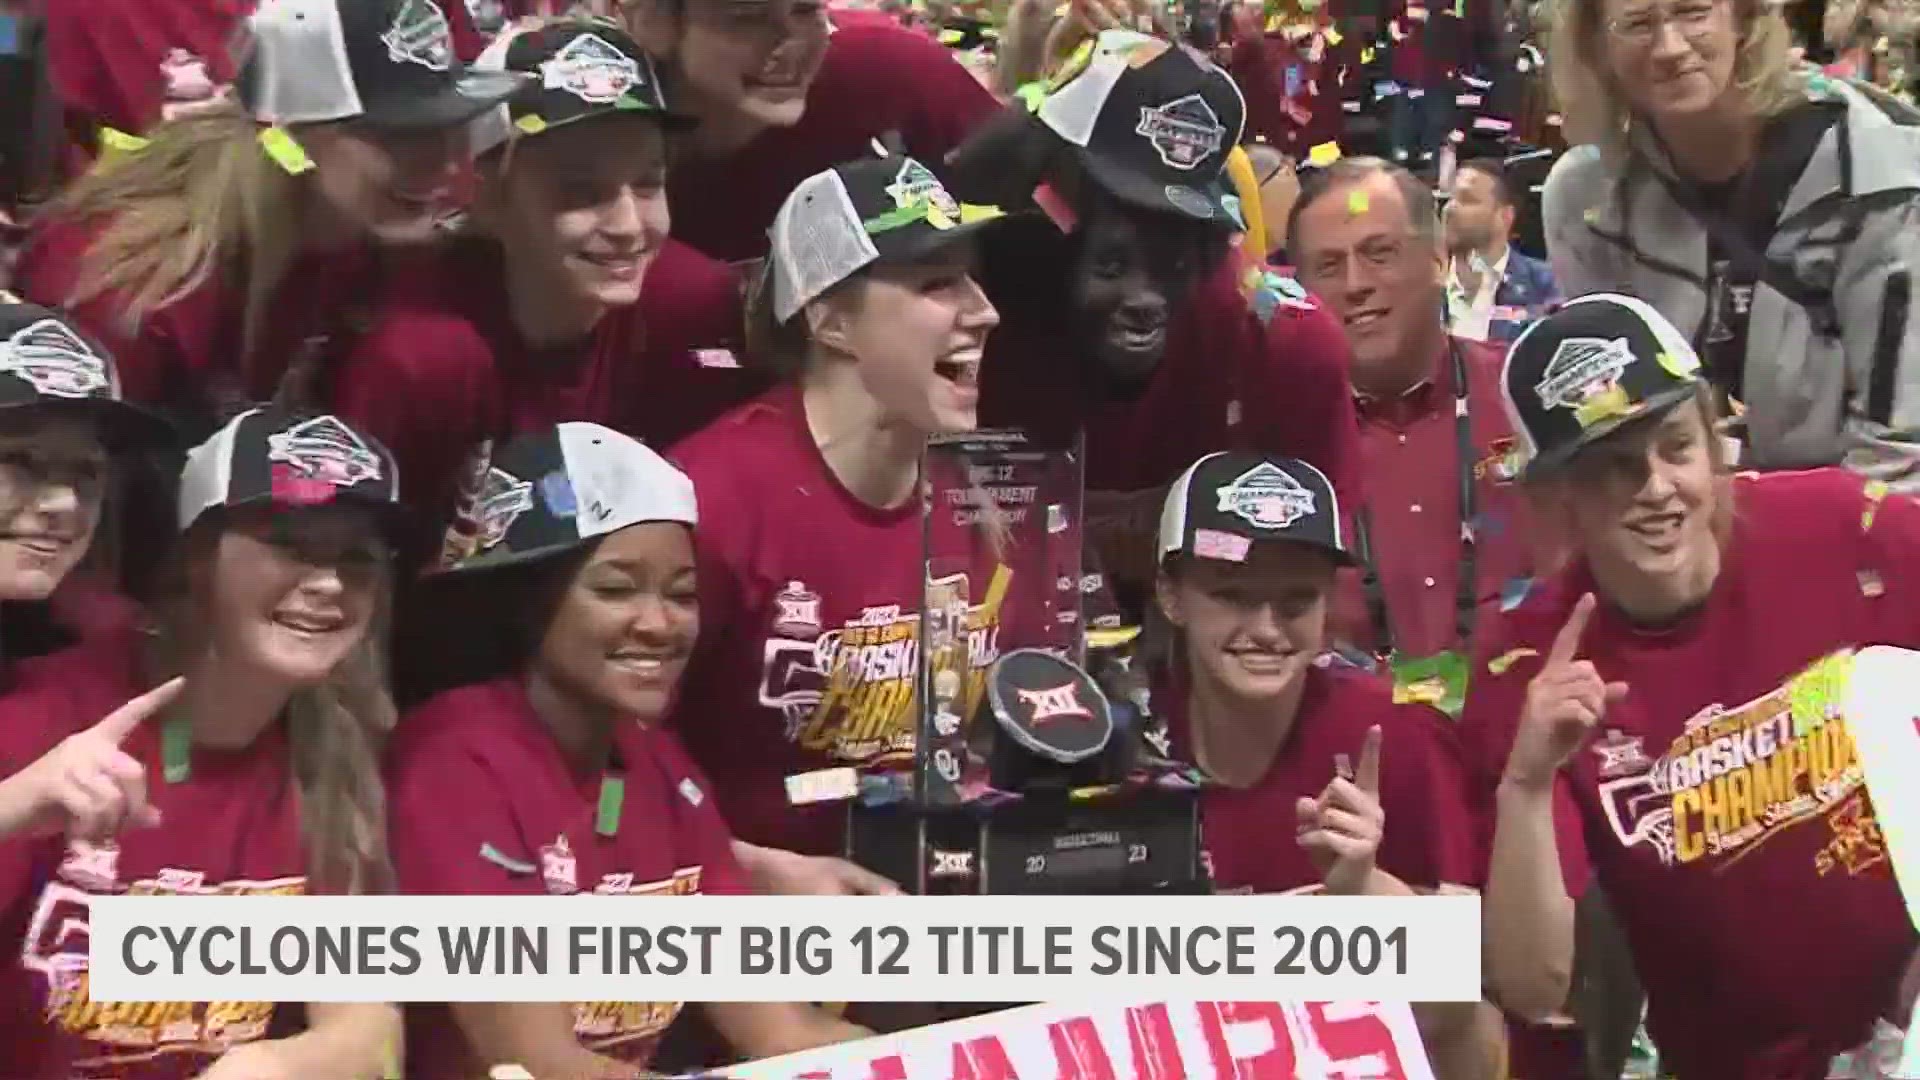 Iowa State defeated Texas in the Big 12 Championship game 61-51 ending a 22-year drought.